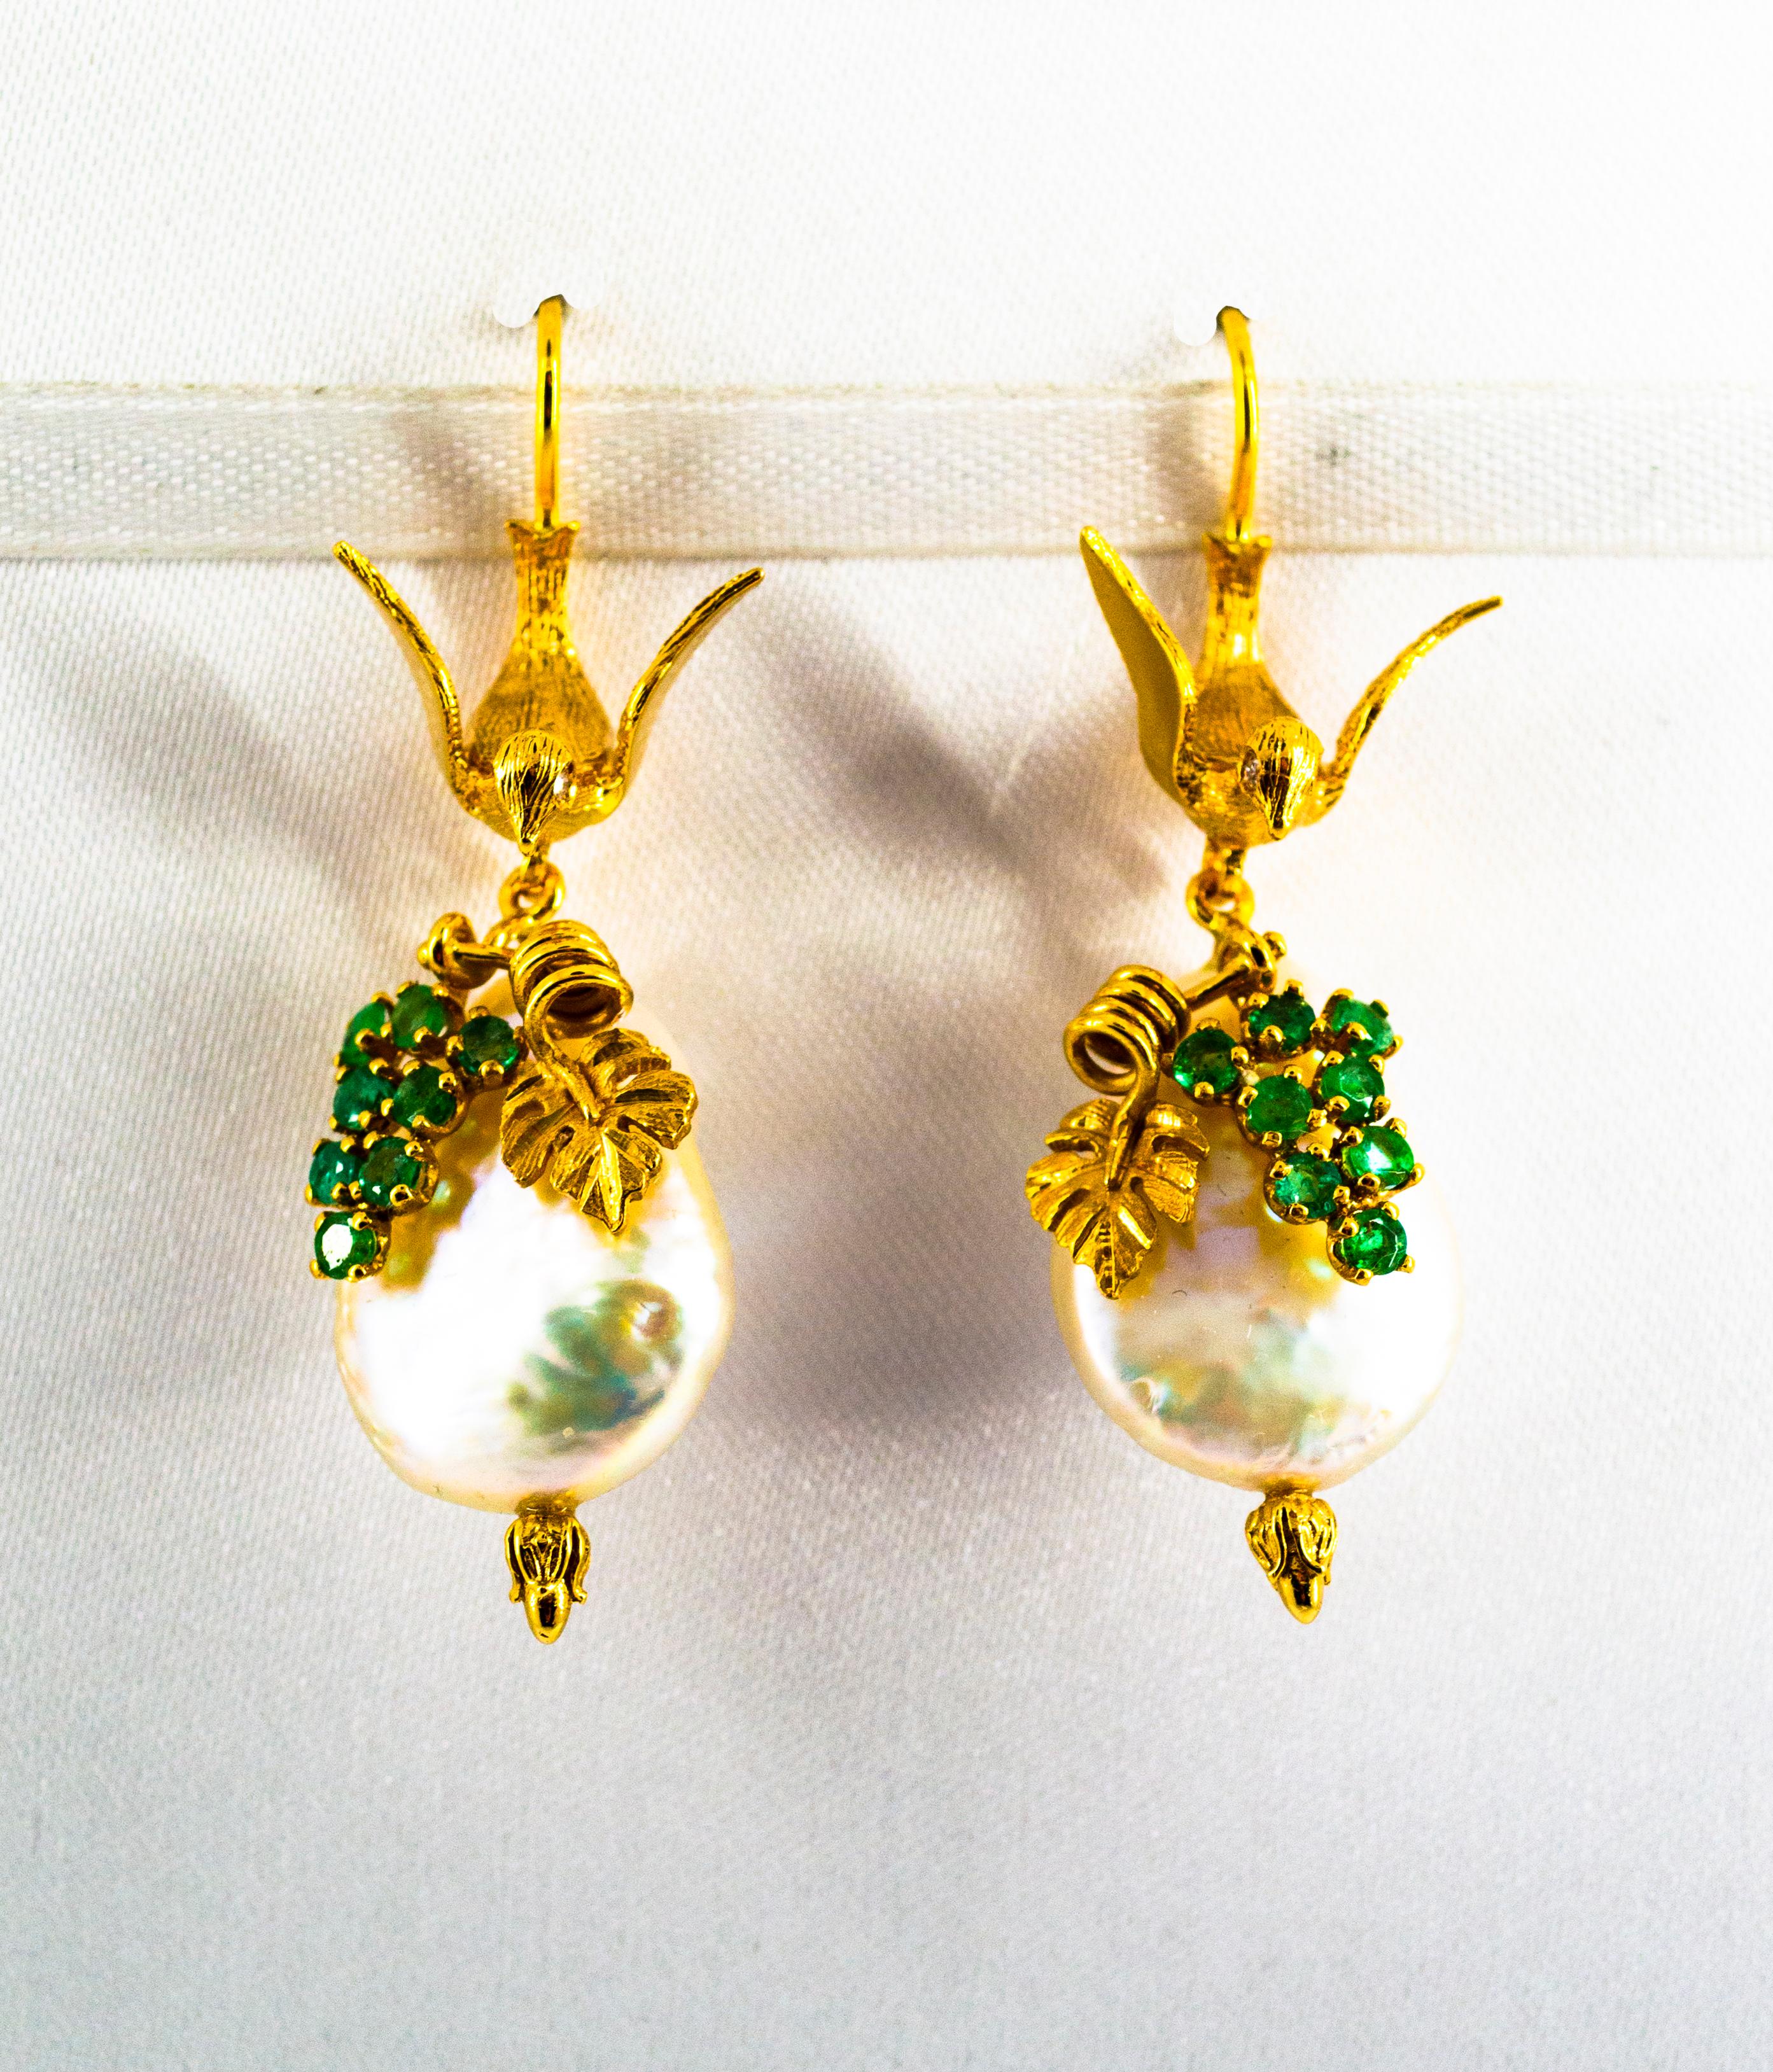 These Earrings are made of 14K Yellow Gold.
These Earrings have 0.40 Carats of Emeralds.
These Earrings have also Pearls.
All our Earrings have pins for pierced ears but we can change the closure and make any of our Earrings suitable even for